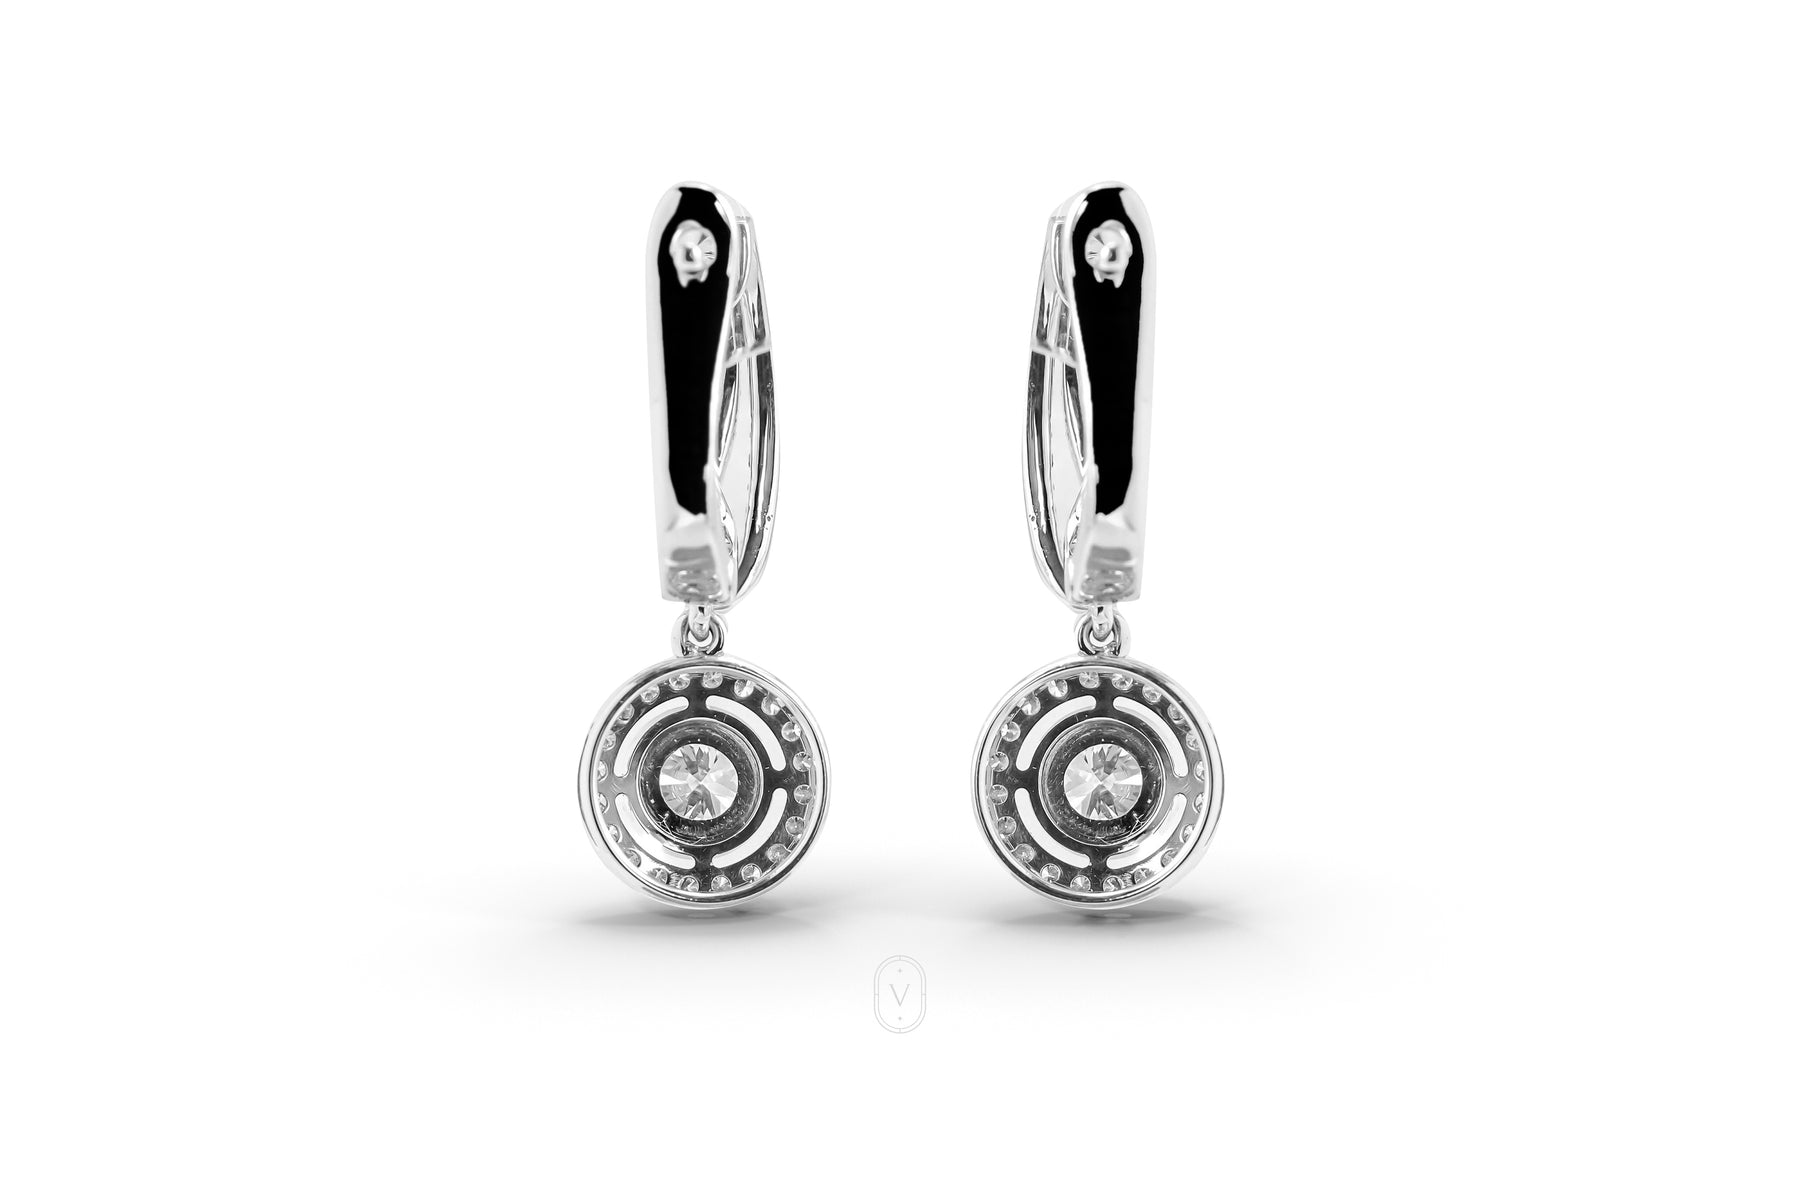 Round Halo Earring